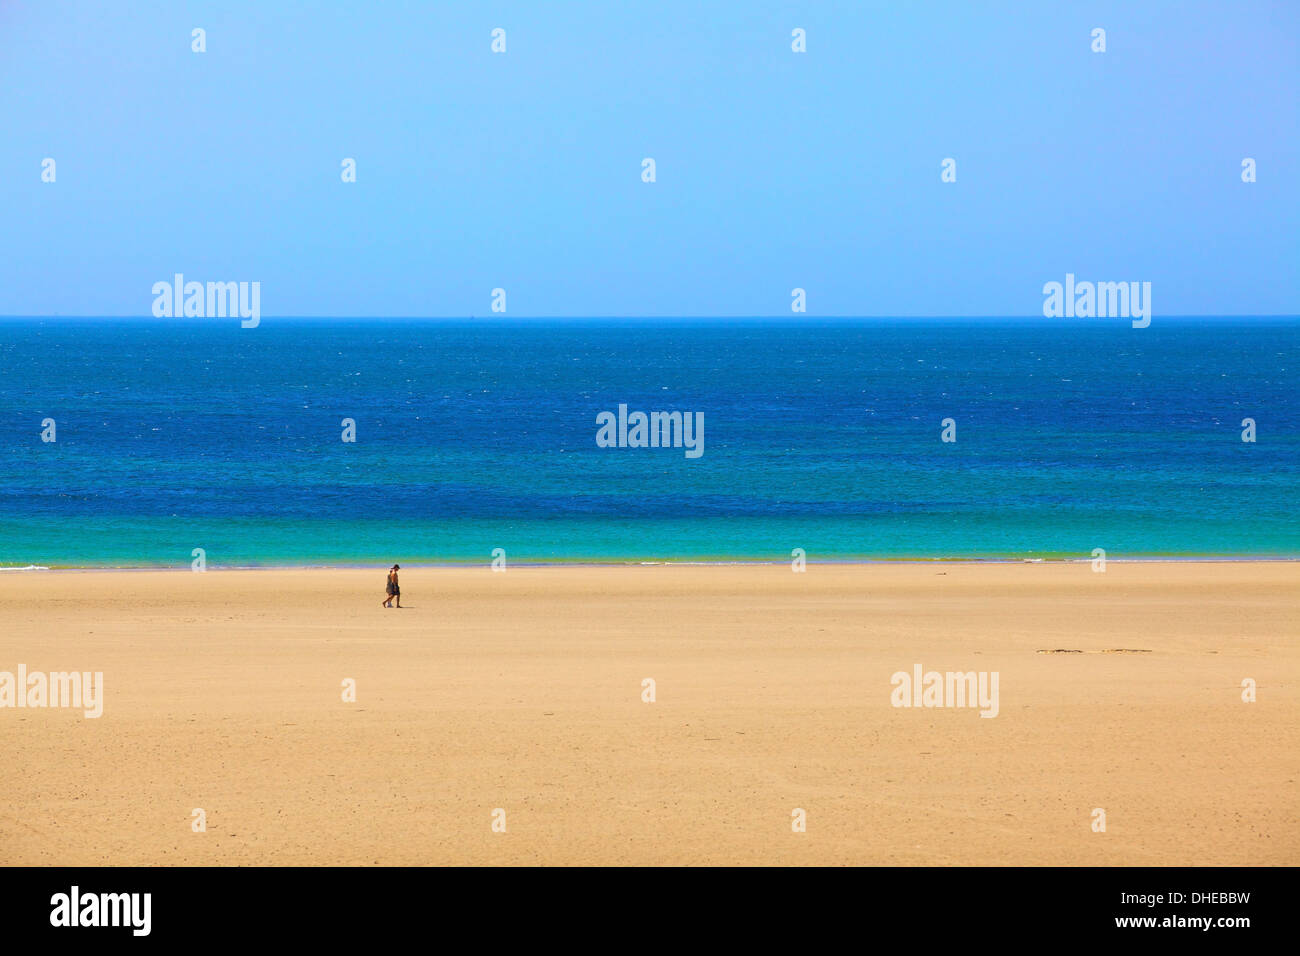 St. Ouen's Bay, Jersey, Channel Islands, Europe Stock Photo